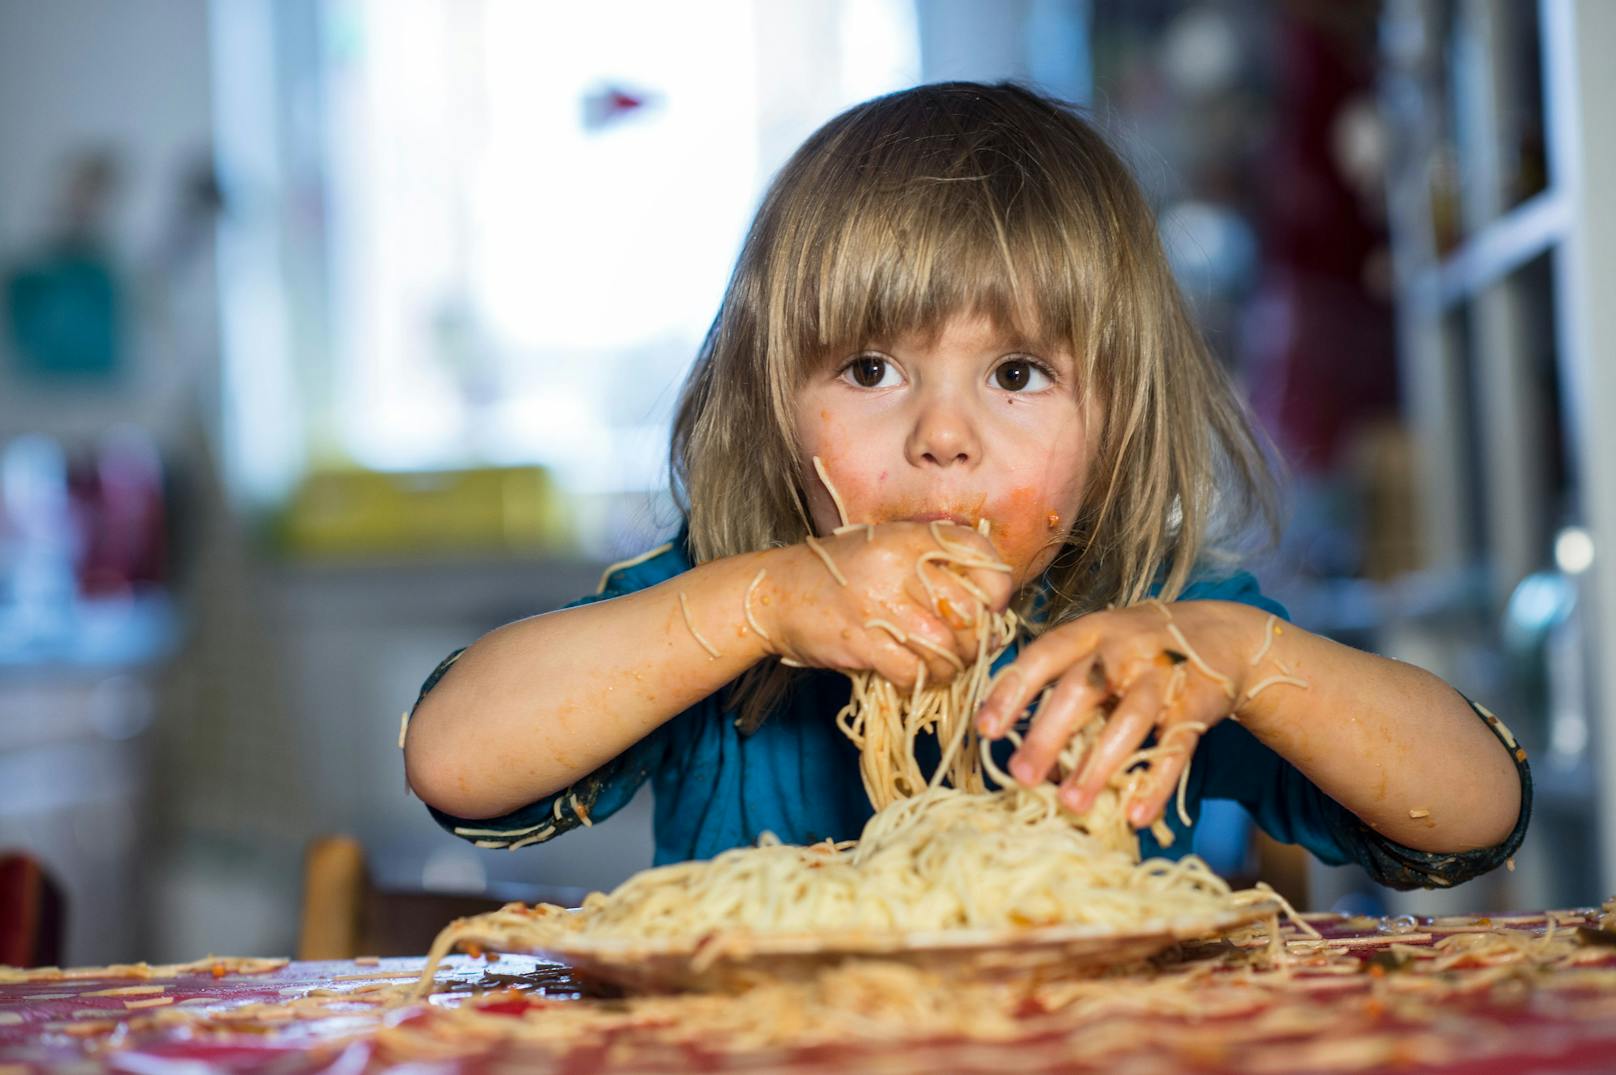 Long-haired Boy eating Spaghetti with his Hands.